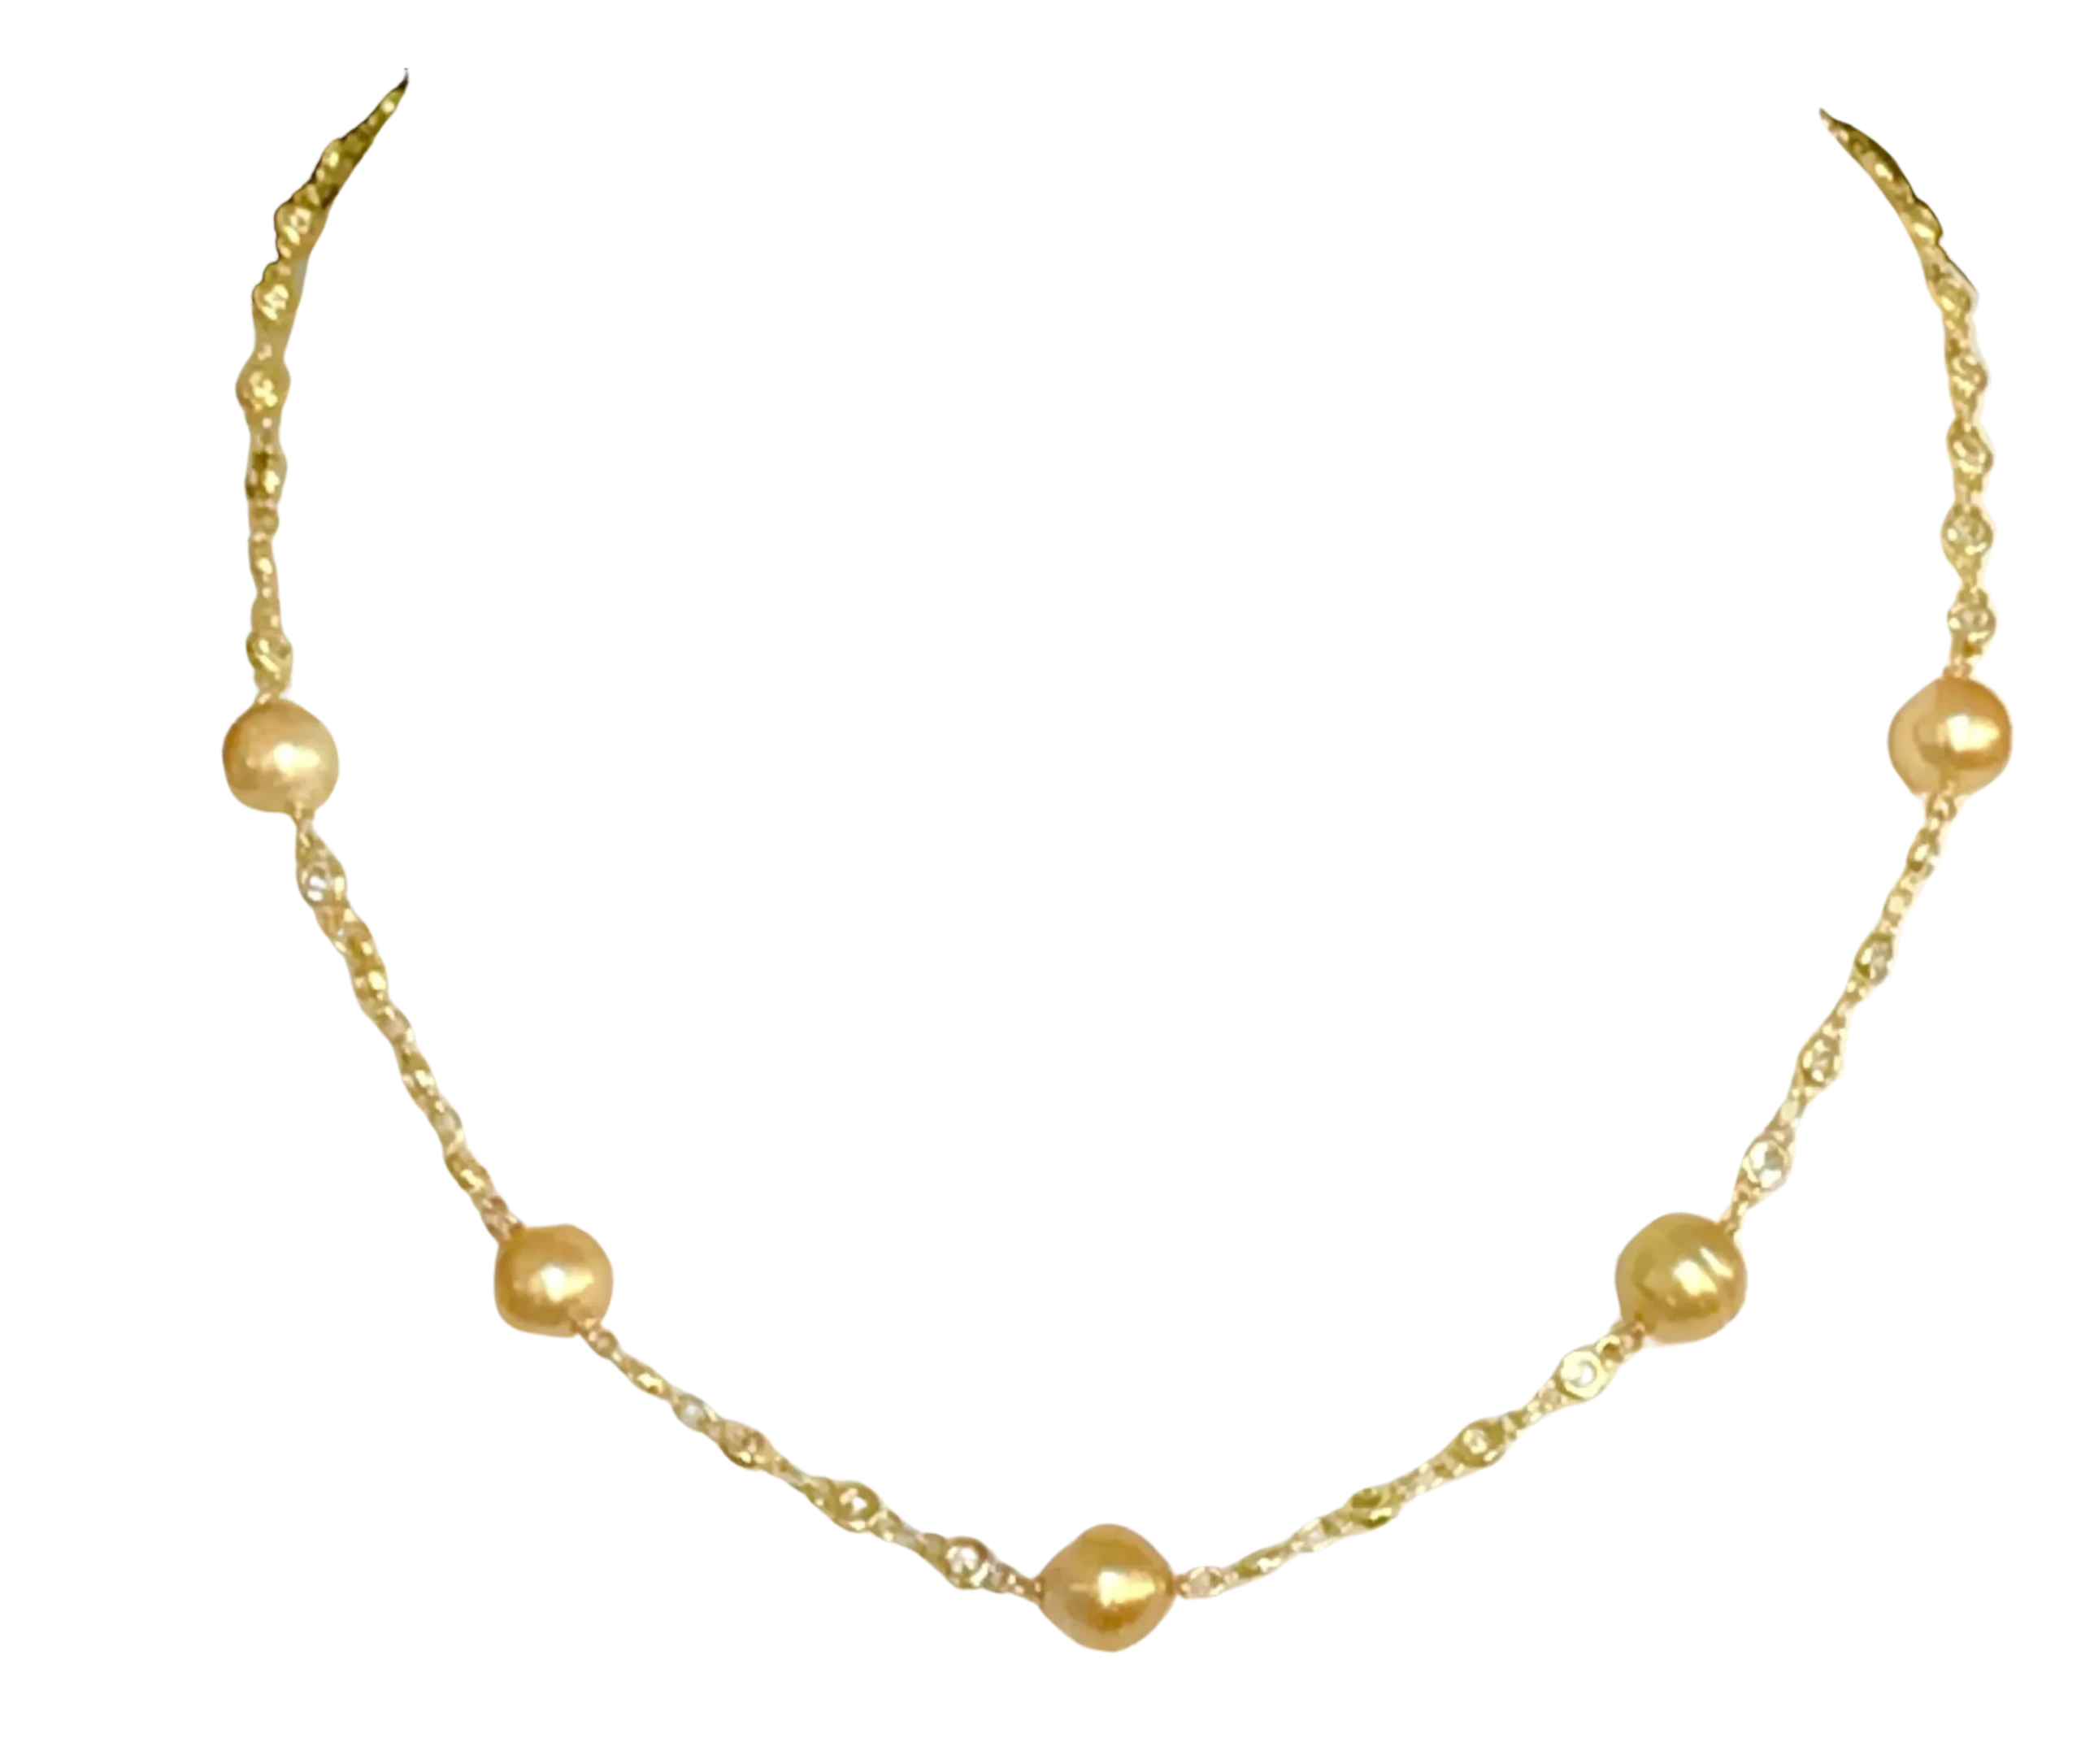 Five beautiful 10-12mm Gold South Sea Pearls on 18" crystal and gold filled chain. Can be made large